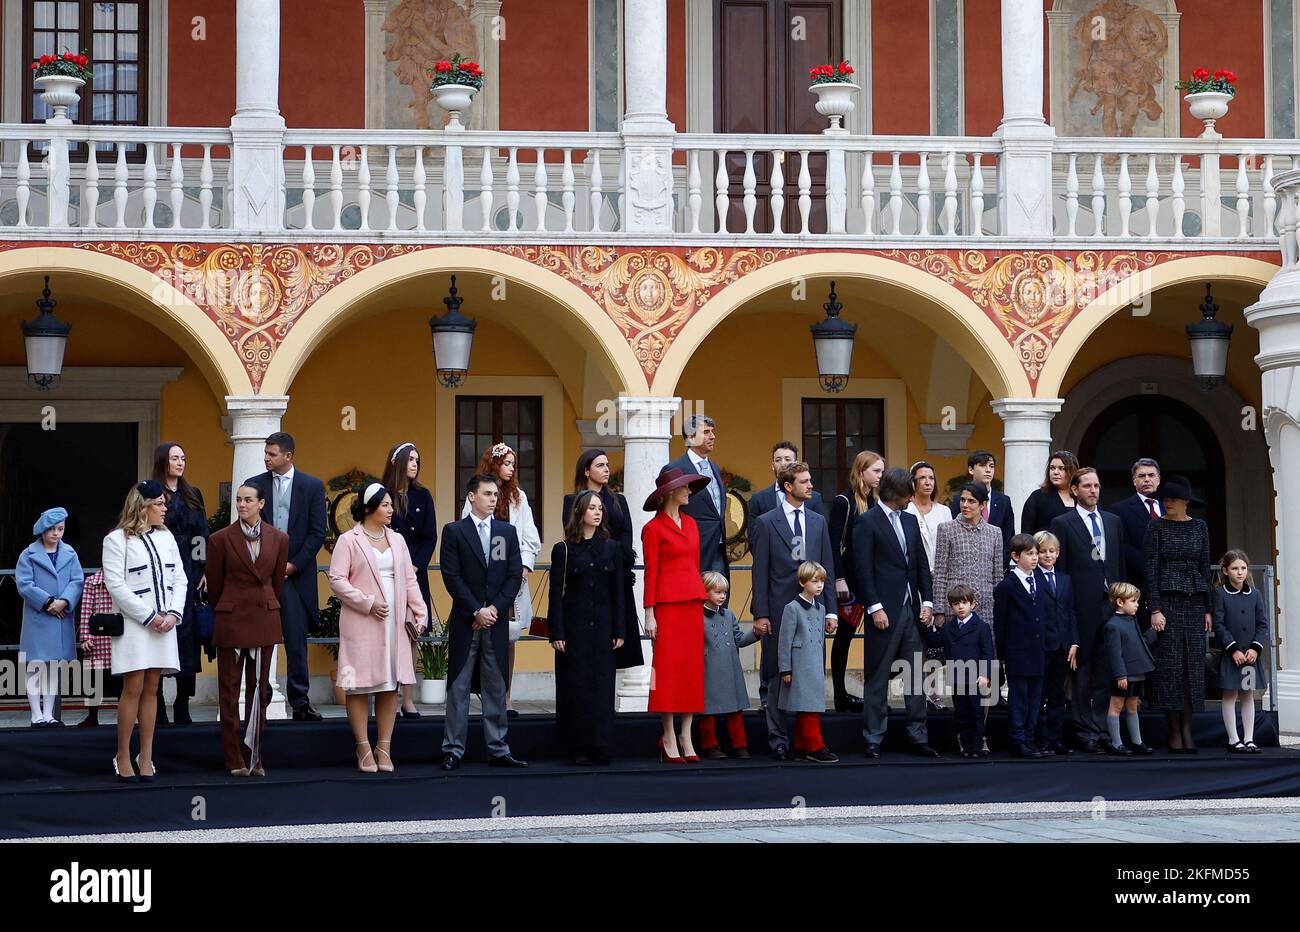 Camille Gottlieb, Pauline Ducruet, Louis Ducruet and his wife Marie Chevallier, Alexandra of Hanover, Pierre Casiraghi and his wife Beatrice Borromeo, their children Stefano Casiraghi and Francesco Casiraghi, Charlotte Casiraghi and her husband Dimitri Rassam, Raphael Elmaleh and Balthazar Rassam, Andrea Casiraghi and his wife Tatiana Santo Domingo, their children Alexandre Casiraghi, India Casiraghi and Maximilian Casiraghi, and guests attend celebrations marking Monaco's National Day at the Palace in Monaco, November 19, 2022. REUTERS/Eric Gaillard/Pool Stock Photo